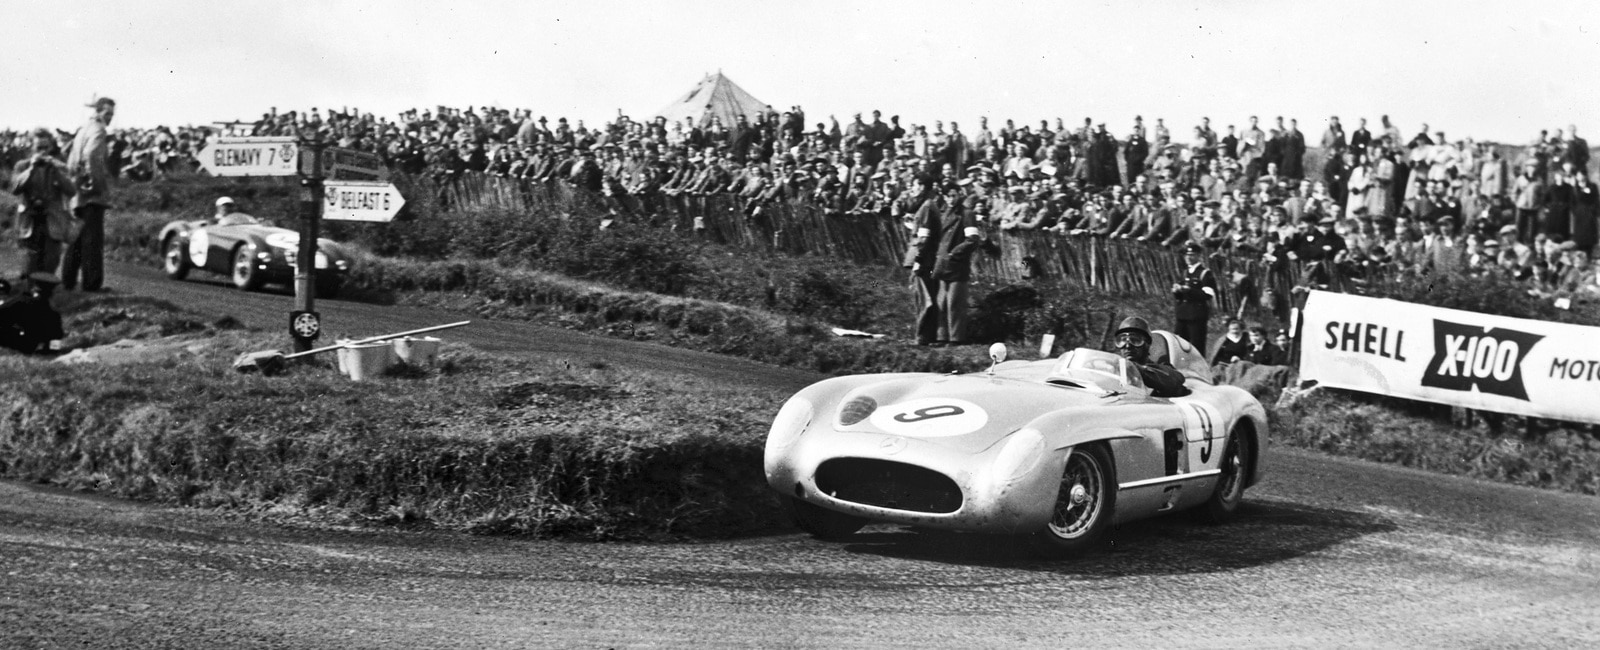 COMCL884888 Sports car races and Sports Car World Championship, 1955